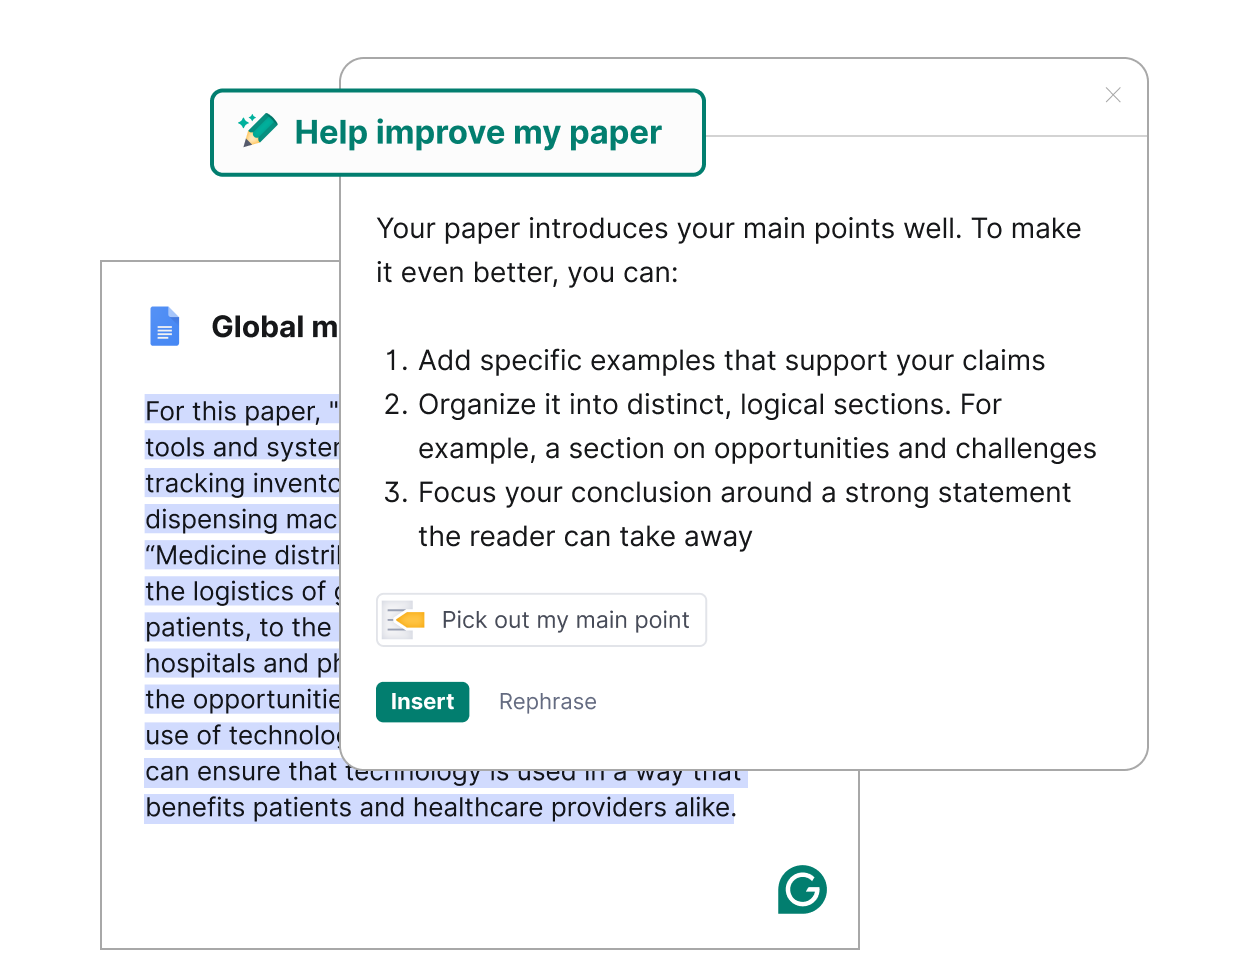 Grammarly helps improve your paper with new ideas